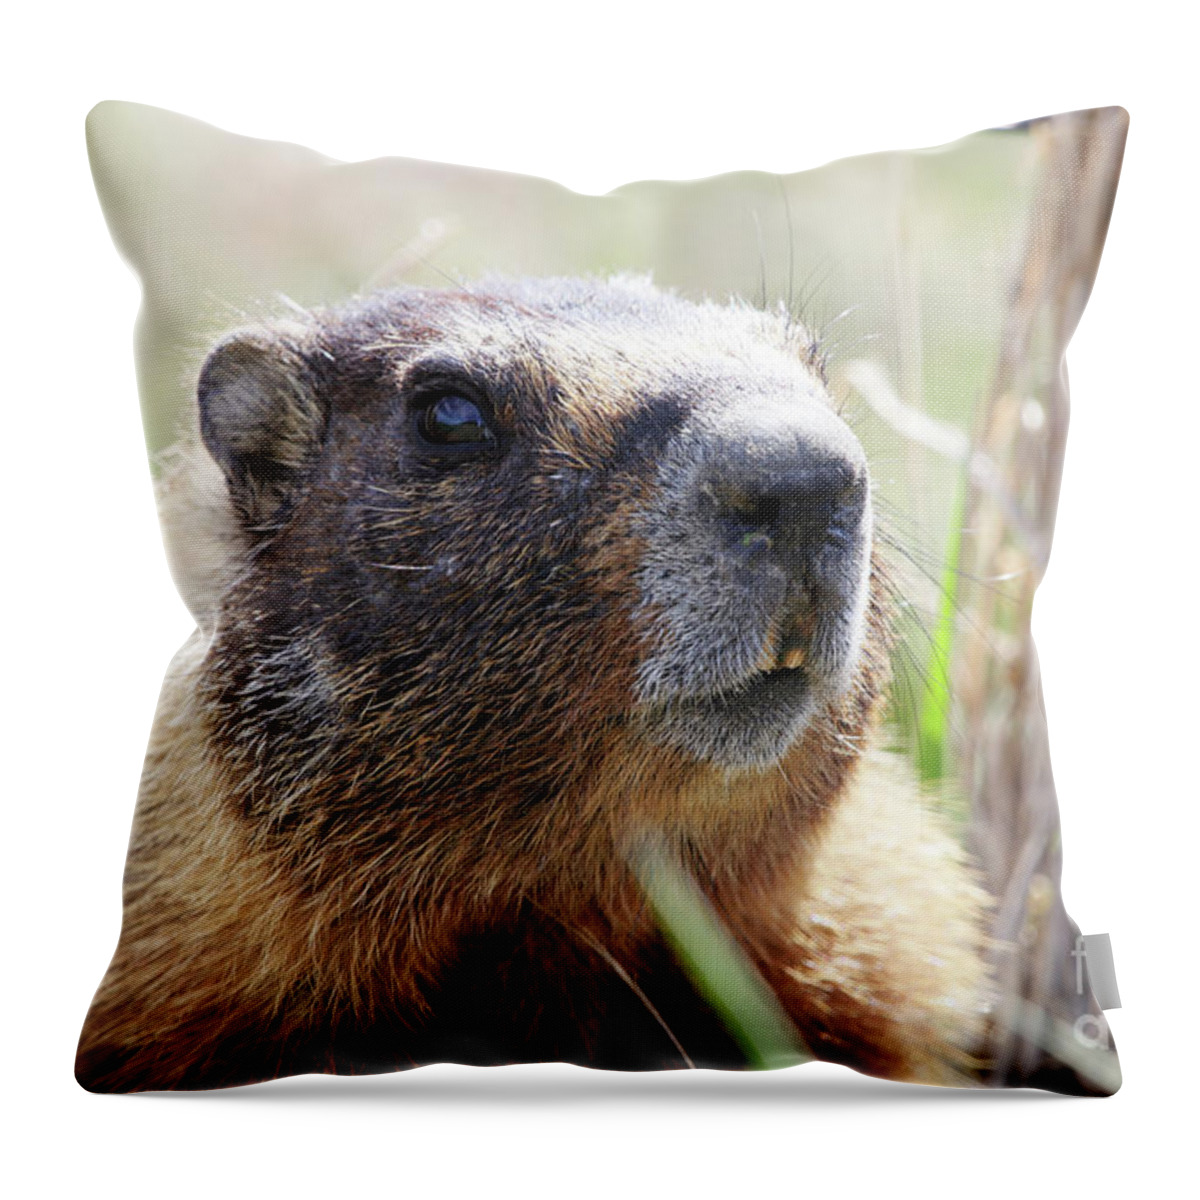 Rock Chuck Throw Pillow featuring the photograph Rock Chuck by Alyce Taylor